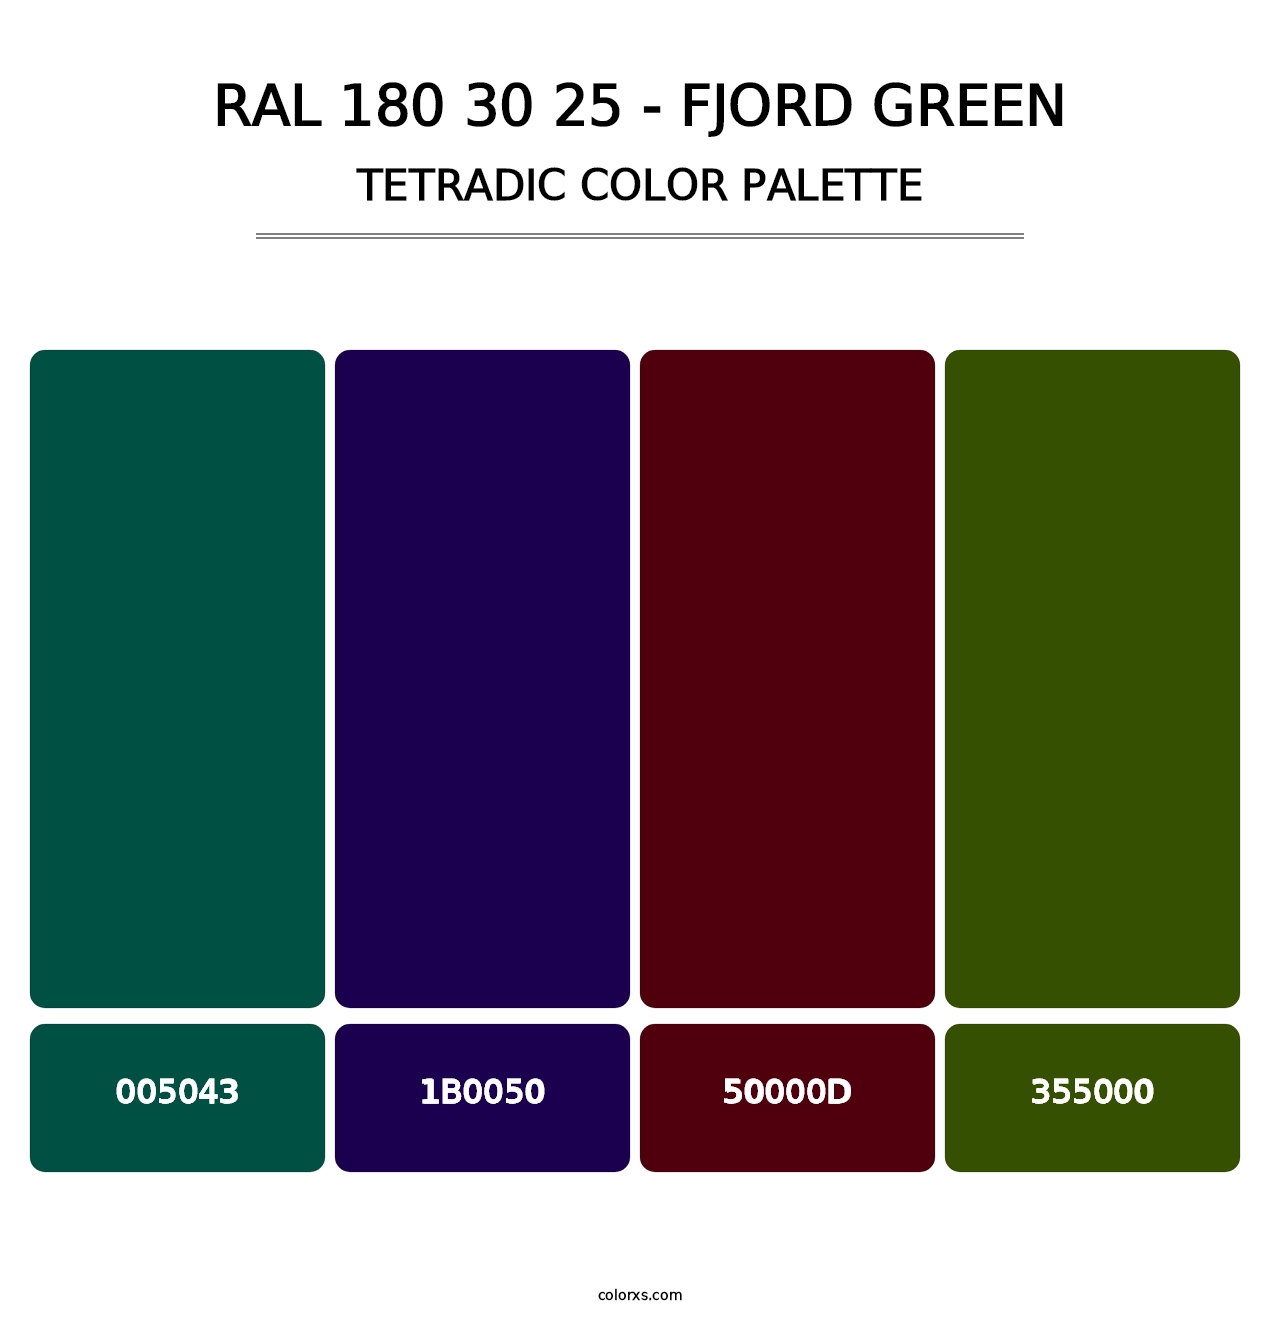 RAL 180 30 25 - Fjord Green - Tetradic Color Palette